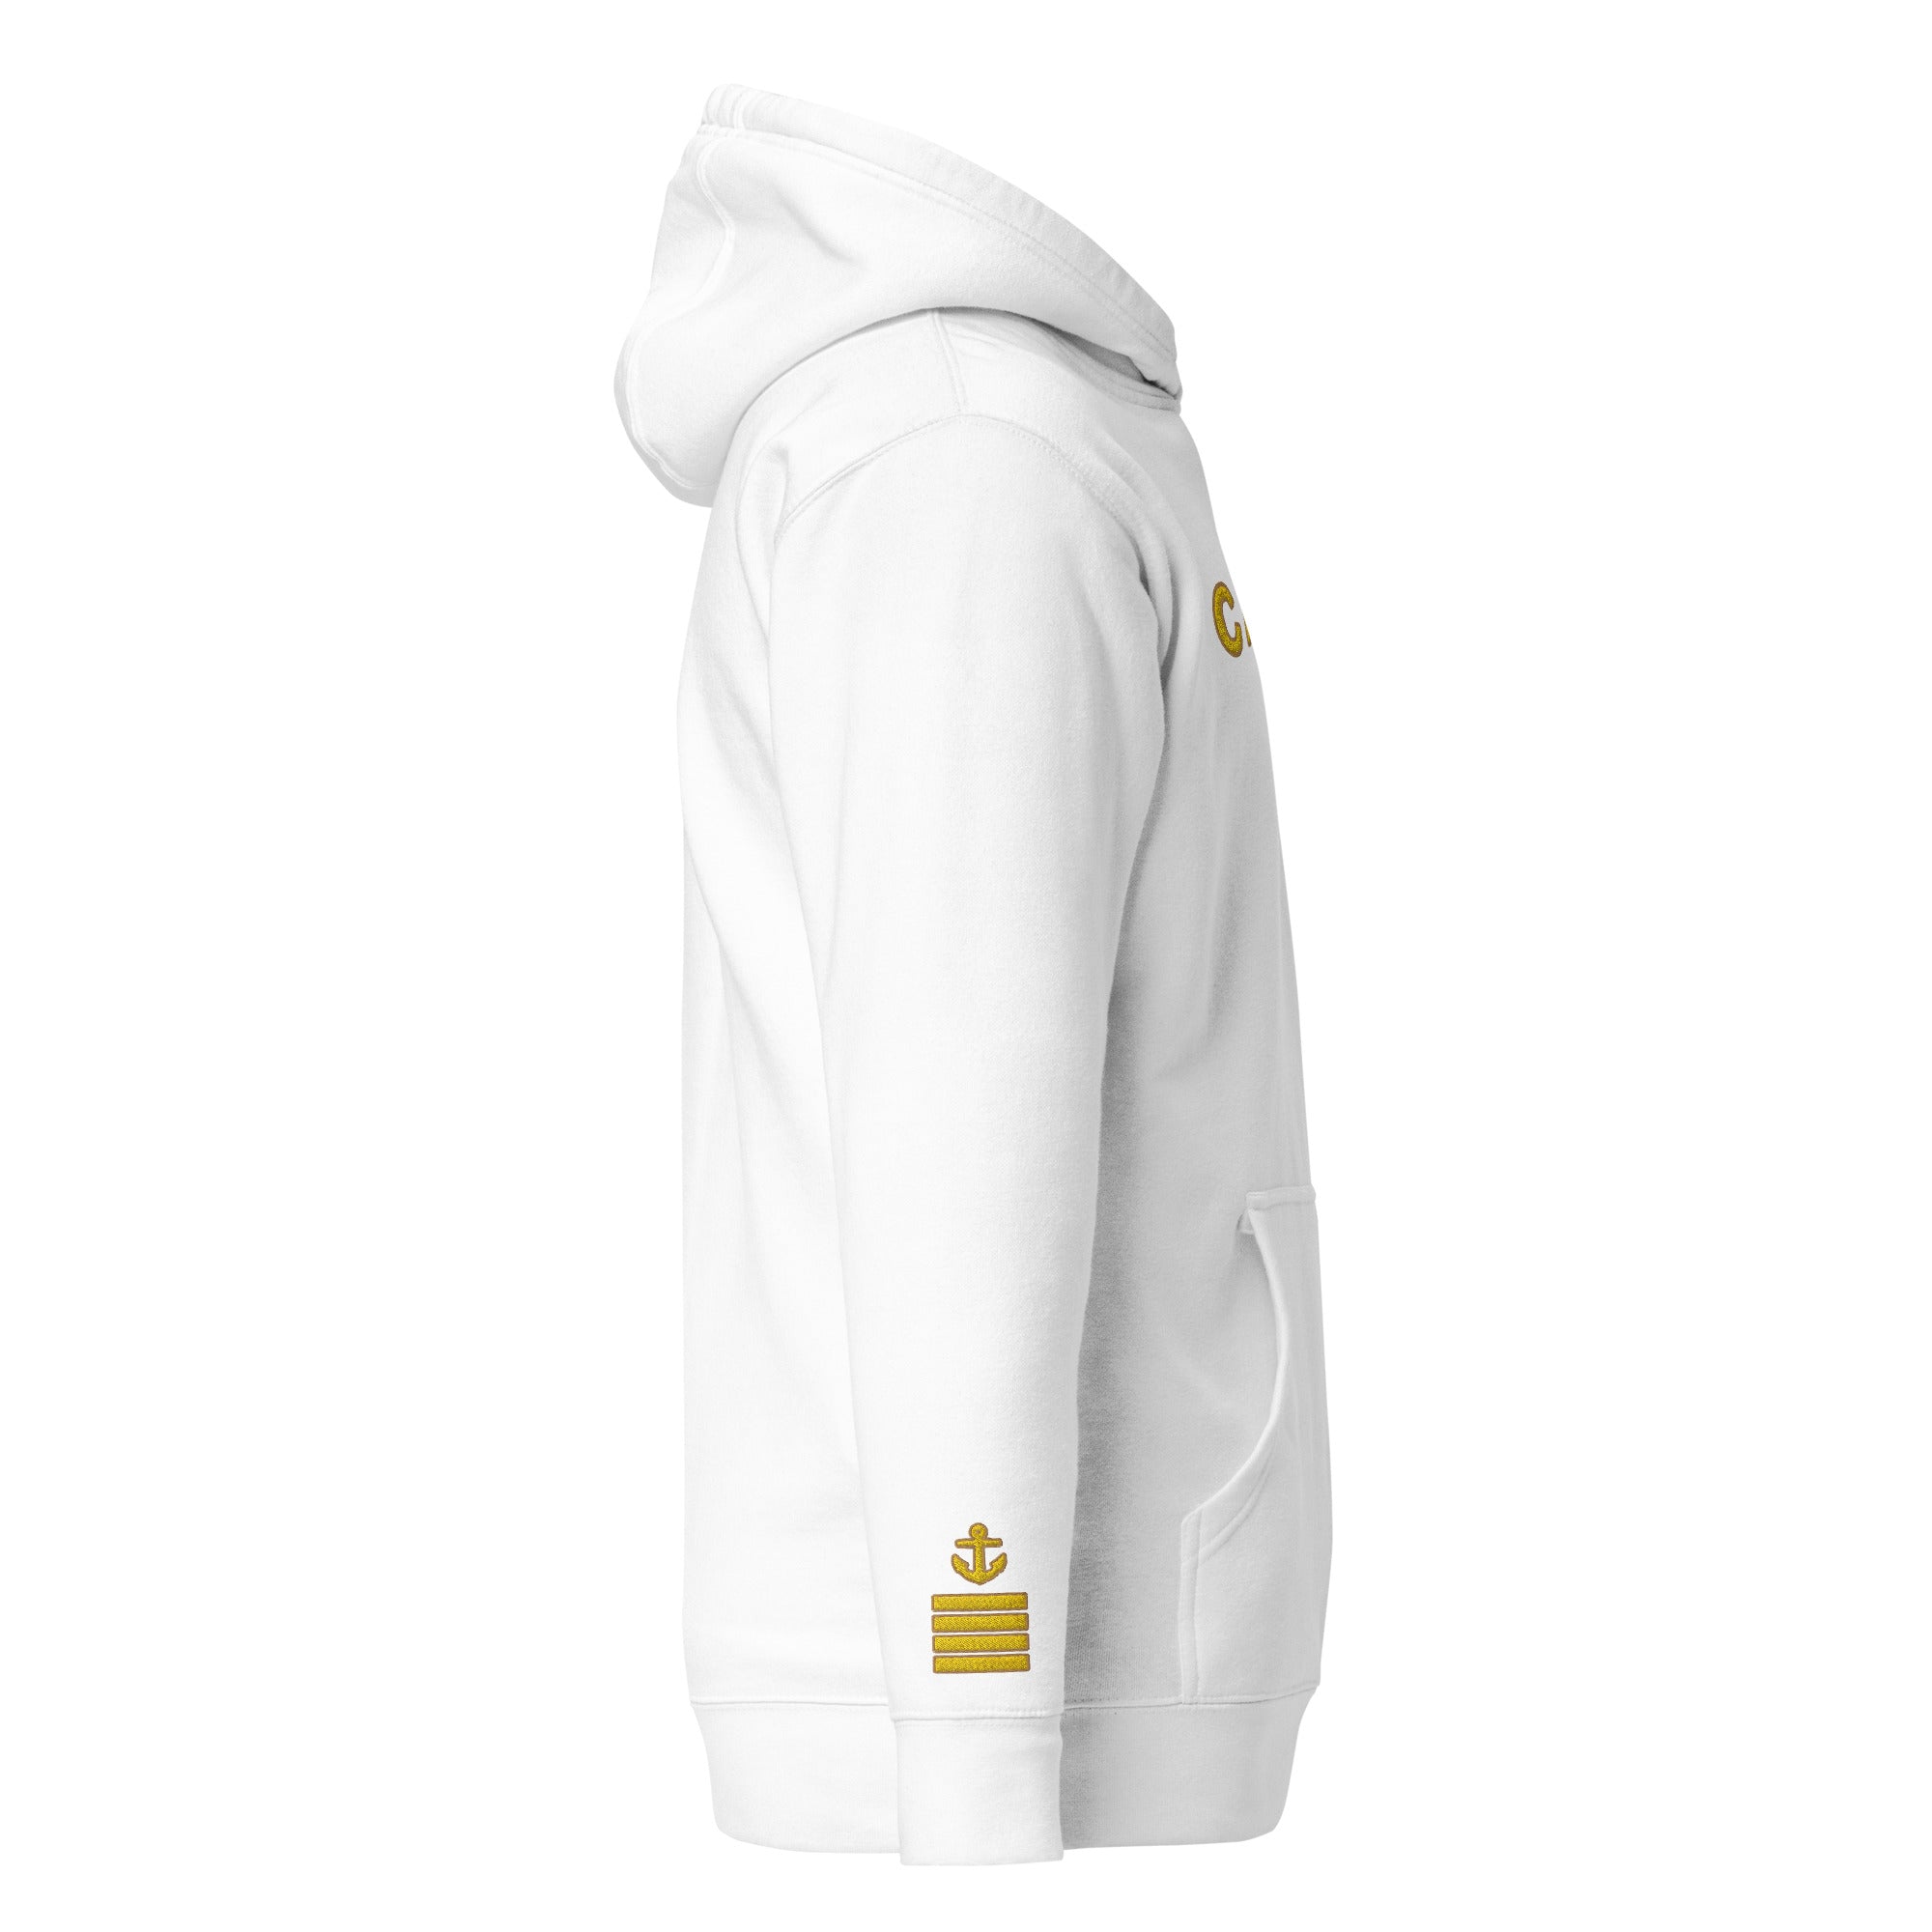 Sophisticated Embroidered Hoodie for Women